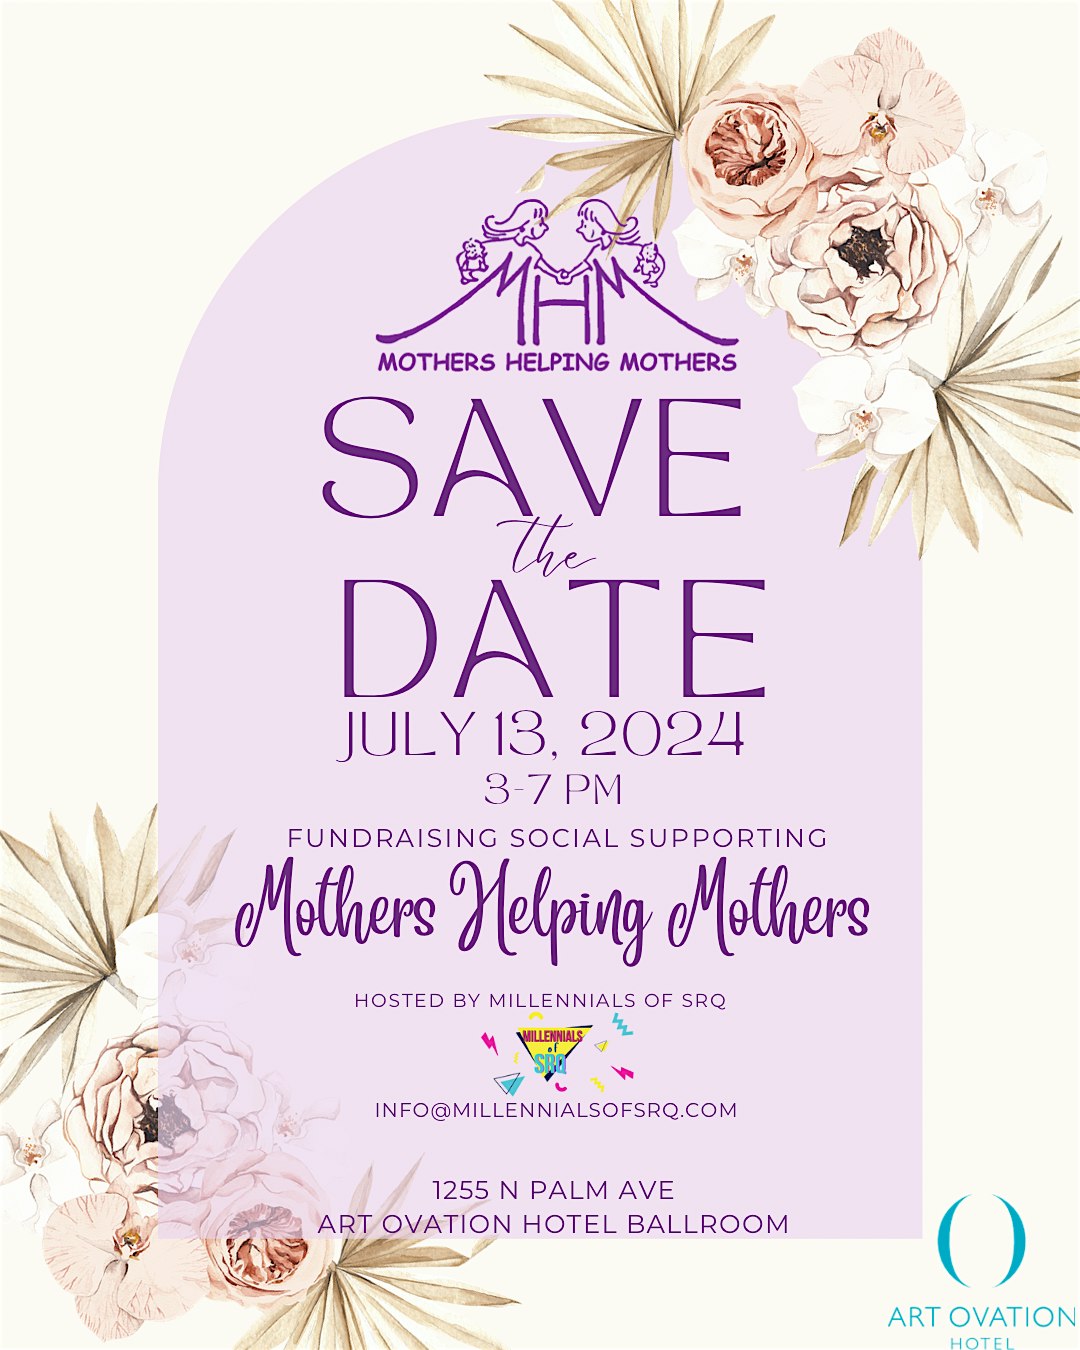 Fundraising Social Benefiting Mothers Helping Mothers